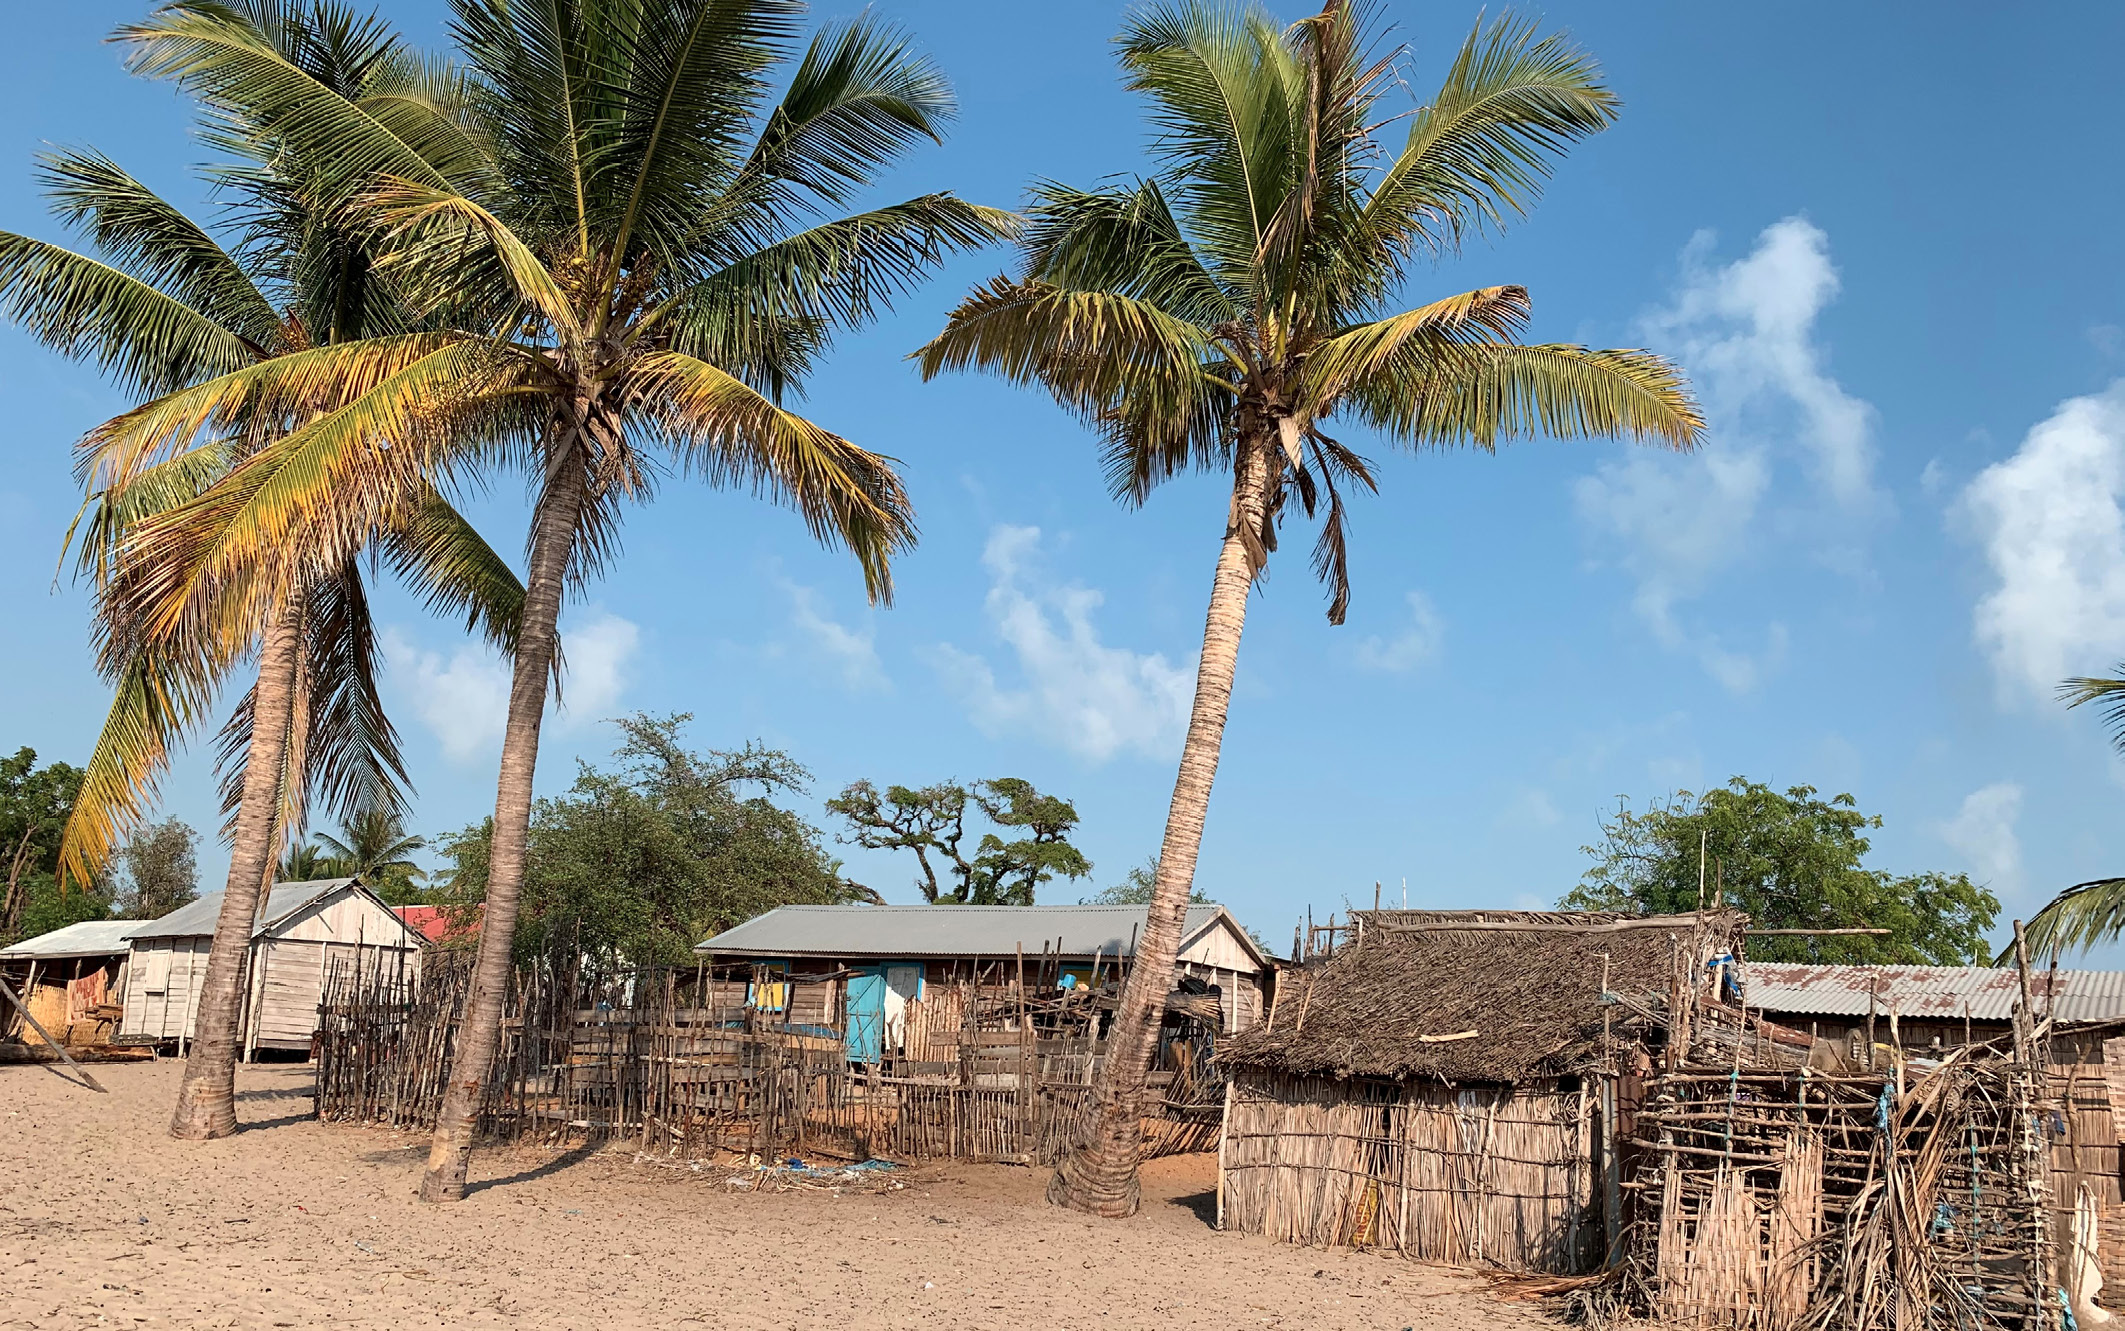 Many in Madagascar do not have electricity: no light, no refrigeration, no air conditioning.